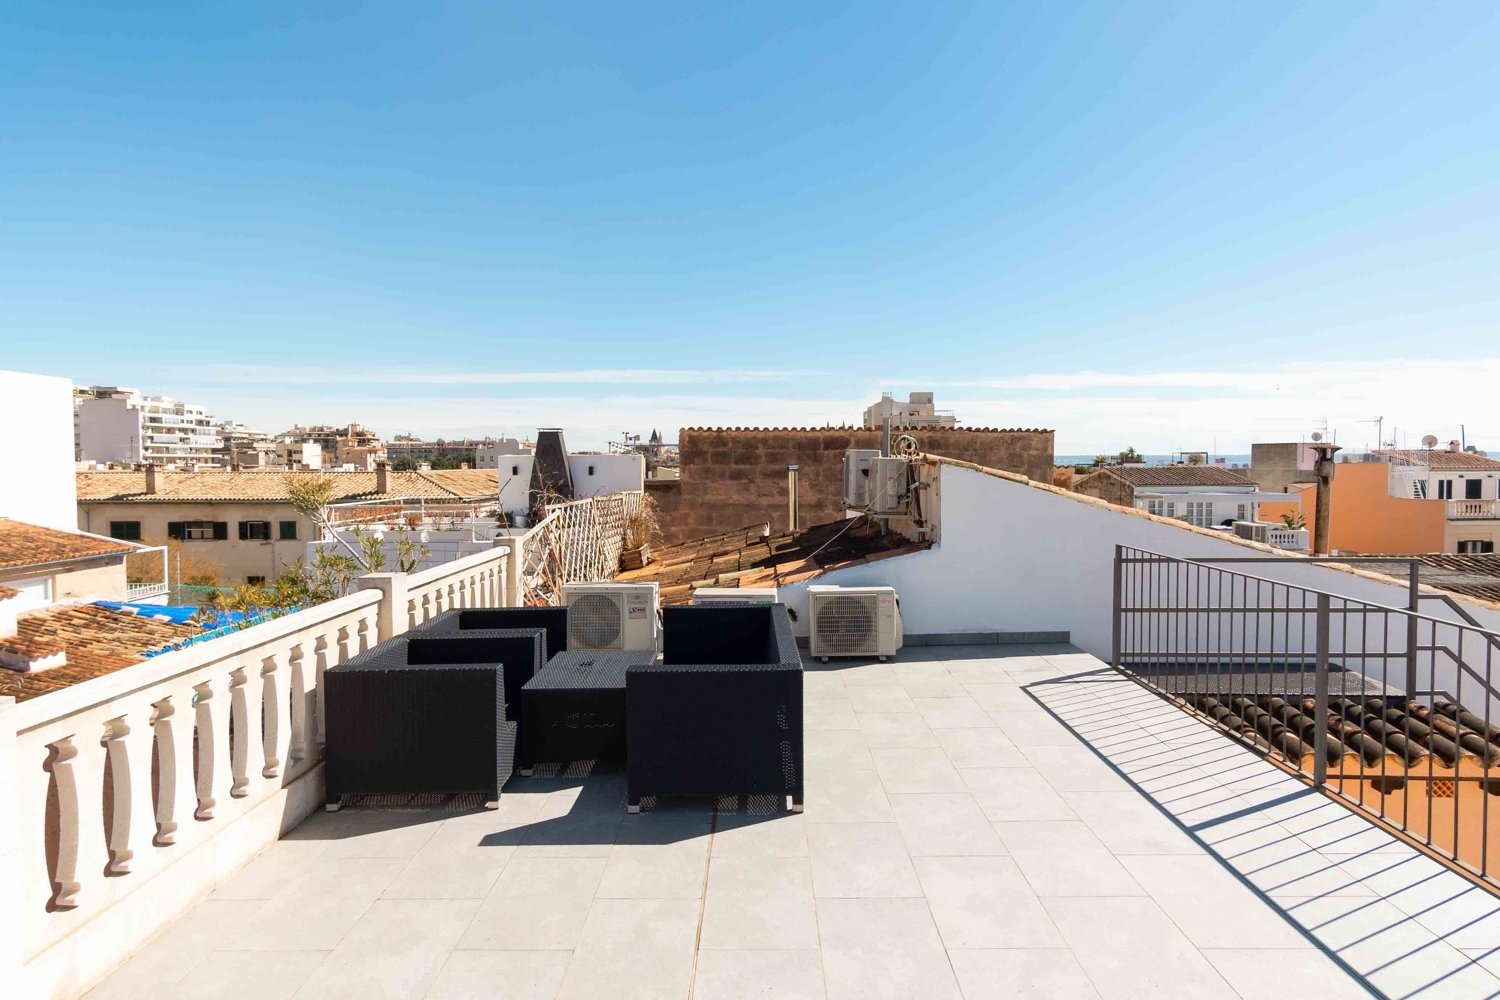 Captivating duplex penthouse apartment with private terrace in the heart of Santa Catalina